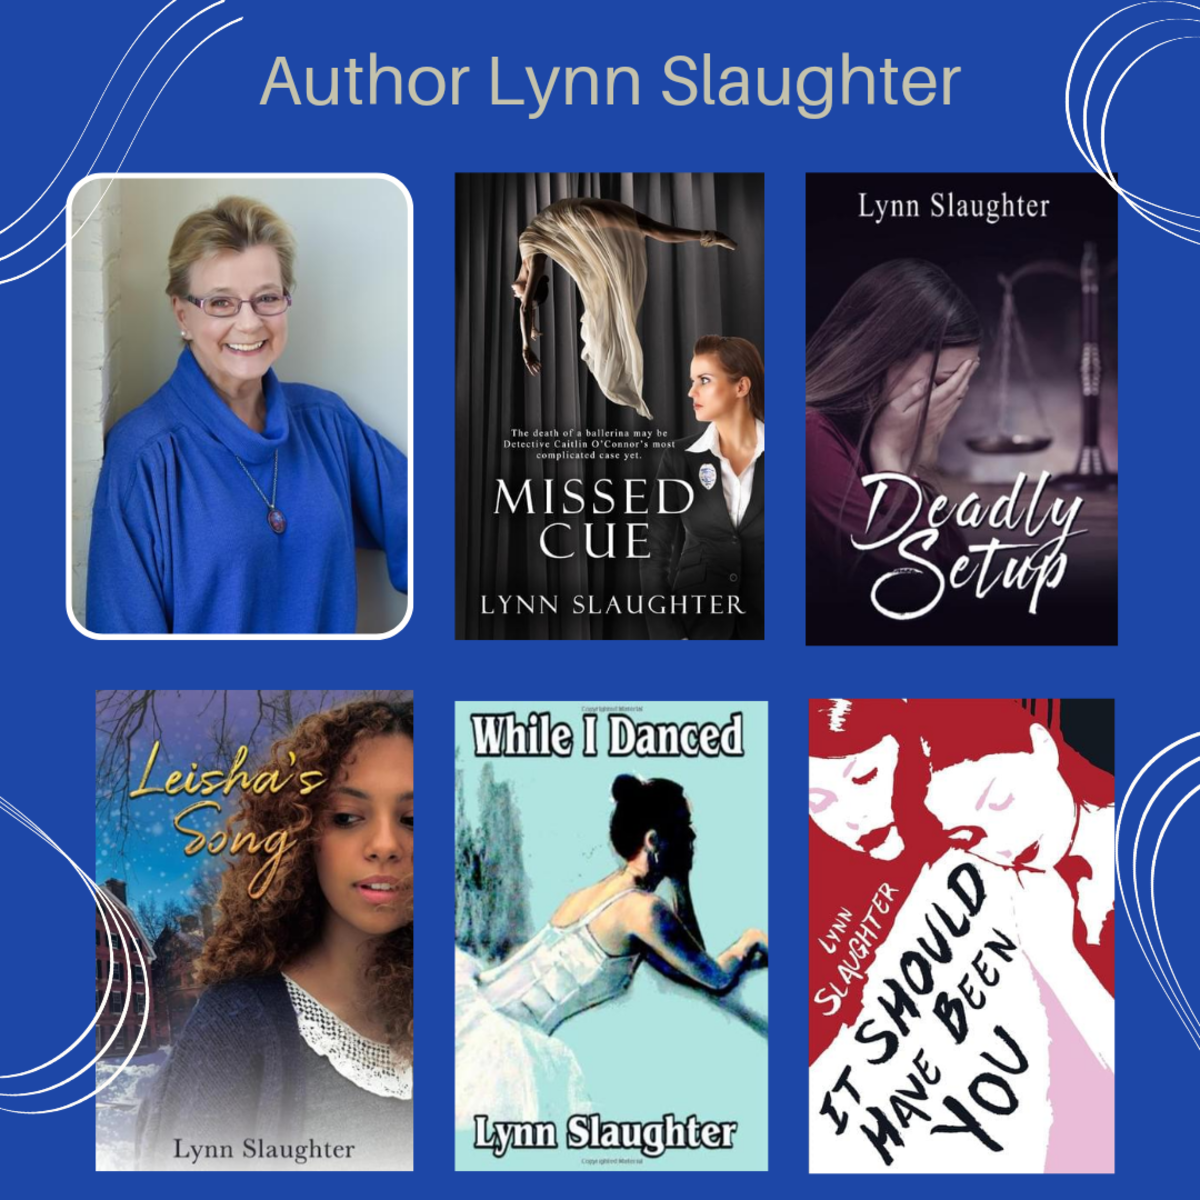 Interview With Author Lynn Slaughter